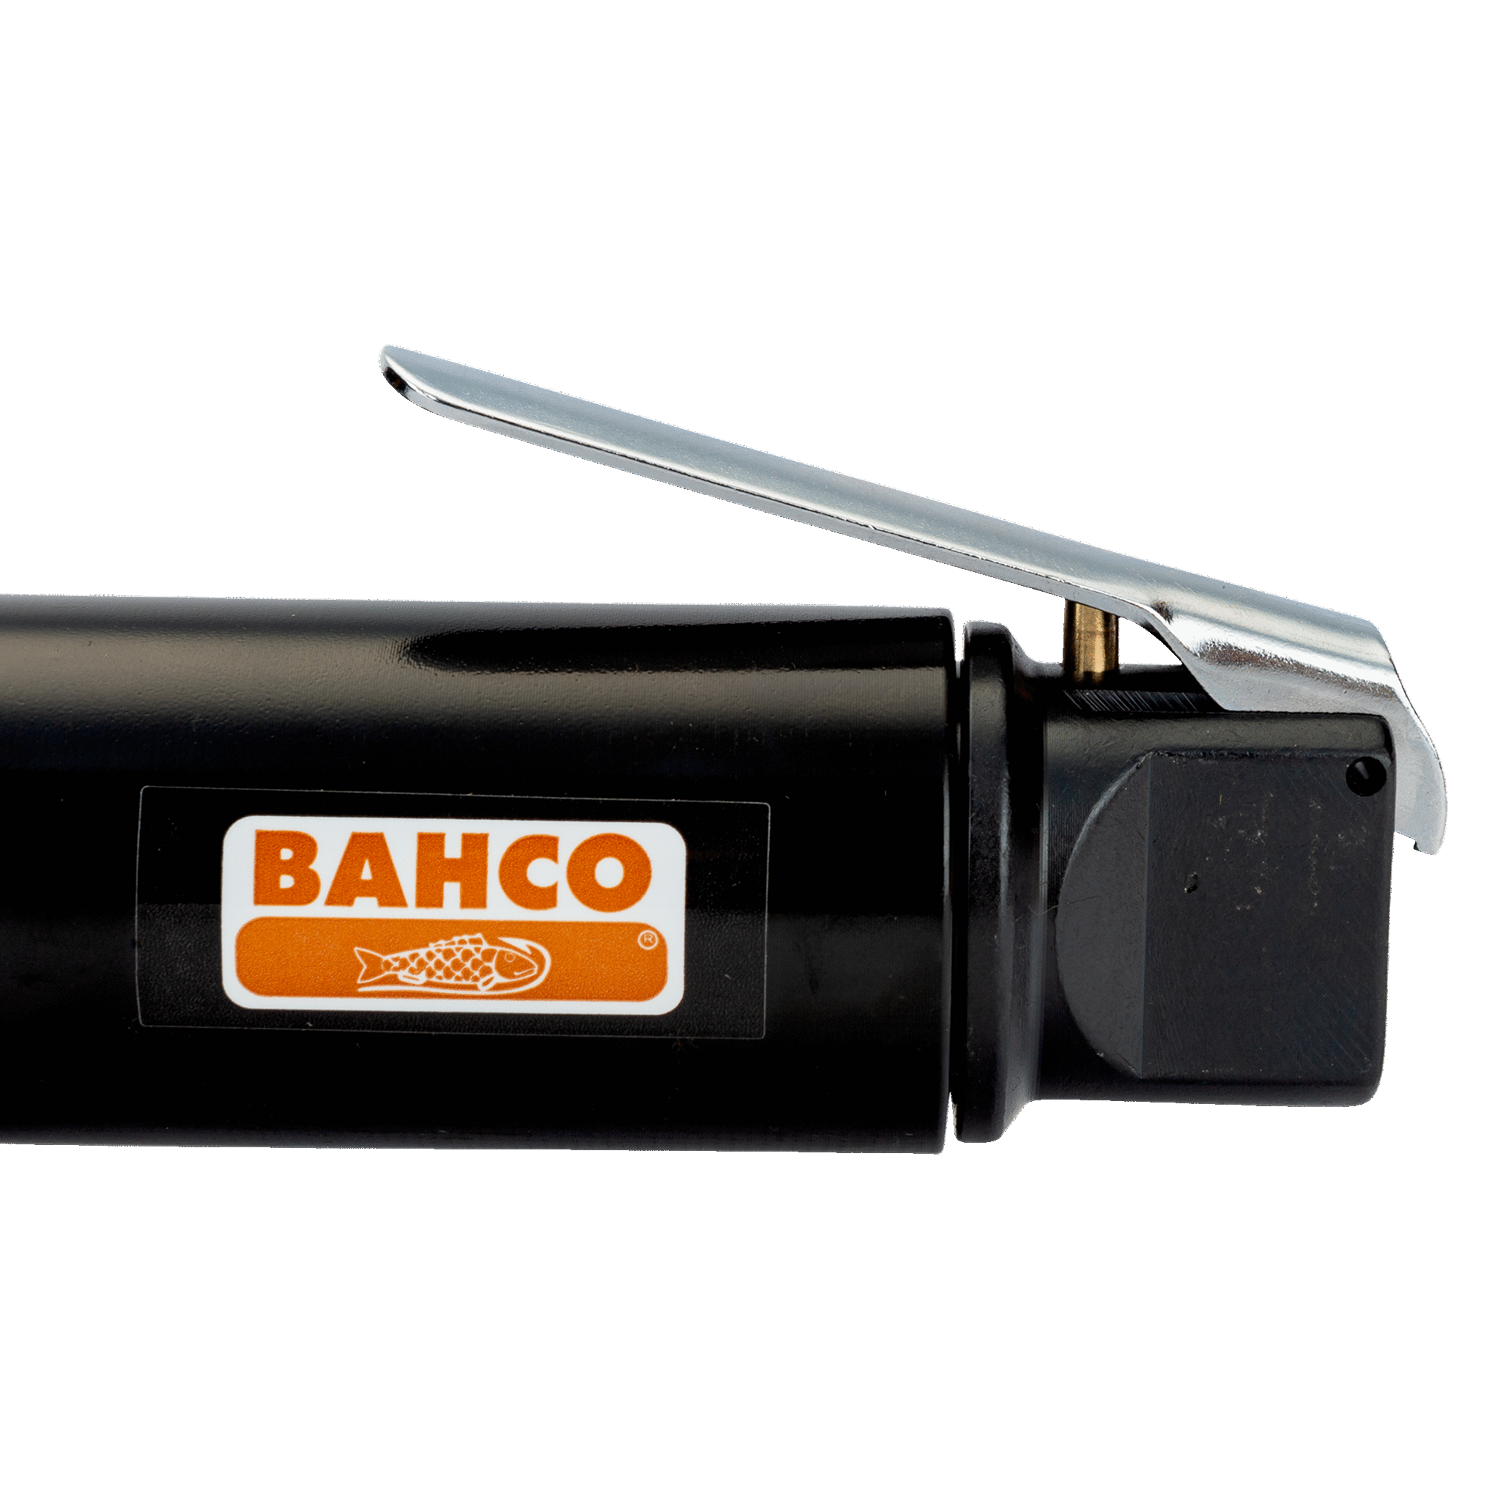 BAHCO BP127 Surface Cleaner with 19 Needles (BAHCO) - Premium Surface Cleaner from BAHCO - Shop now at Yew Aik.